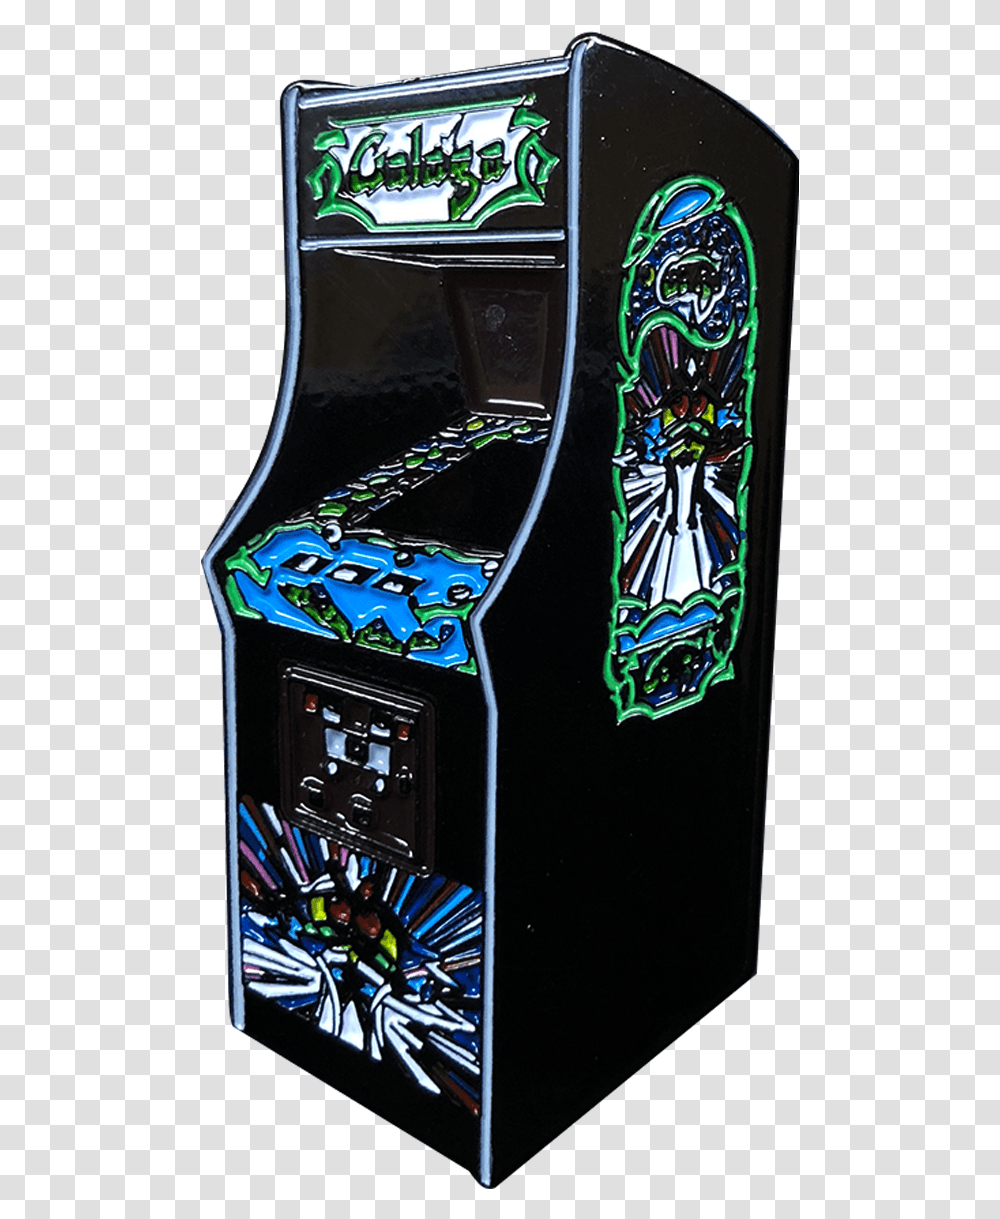 Nerd Pins Galaga Pin Video Game Arcade Cabinet, Arcade Game Machine, Stained Glass Transparent Png